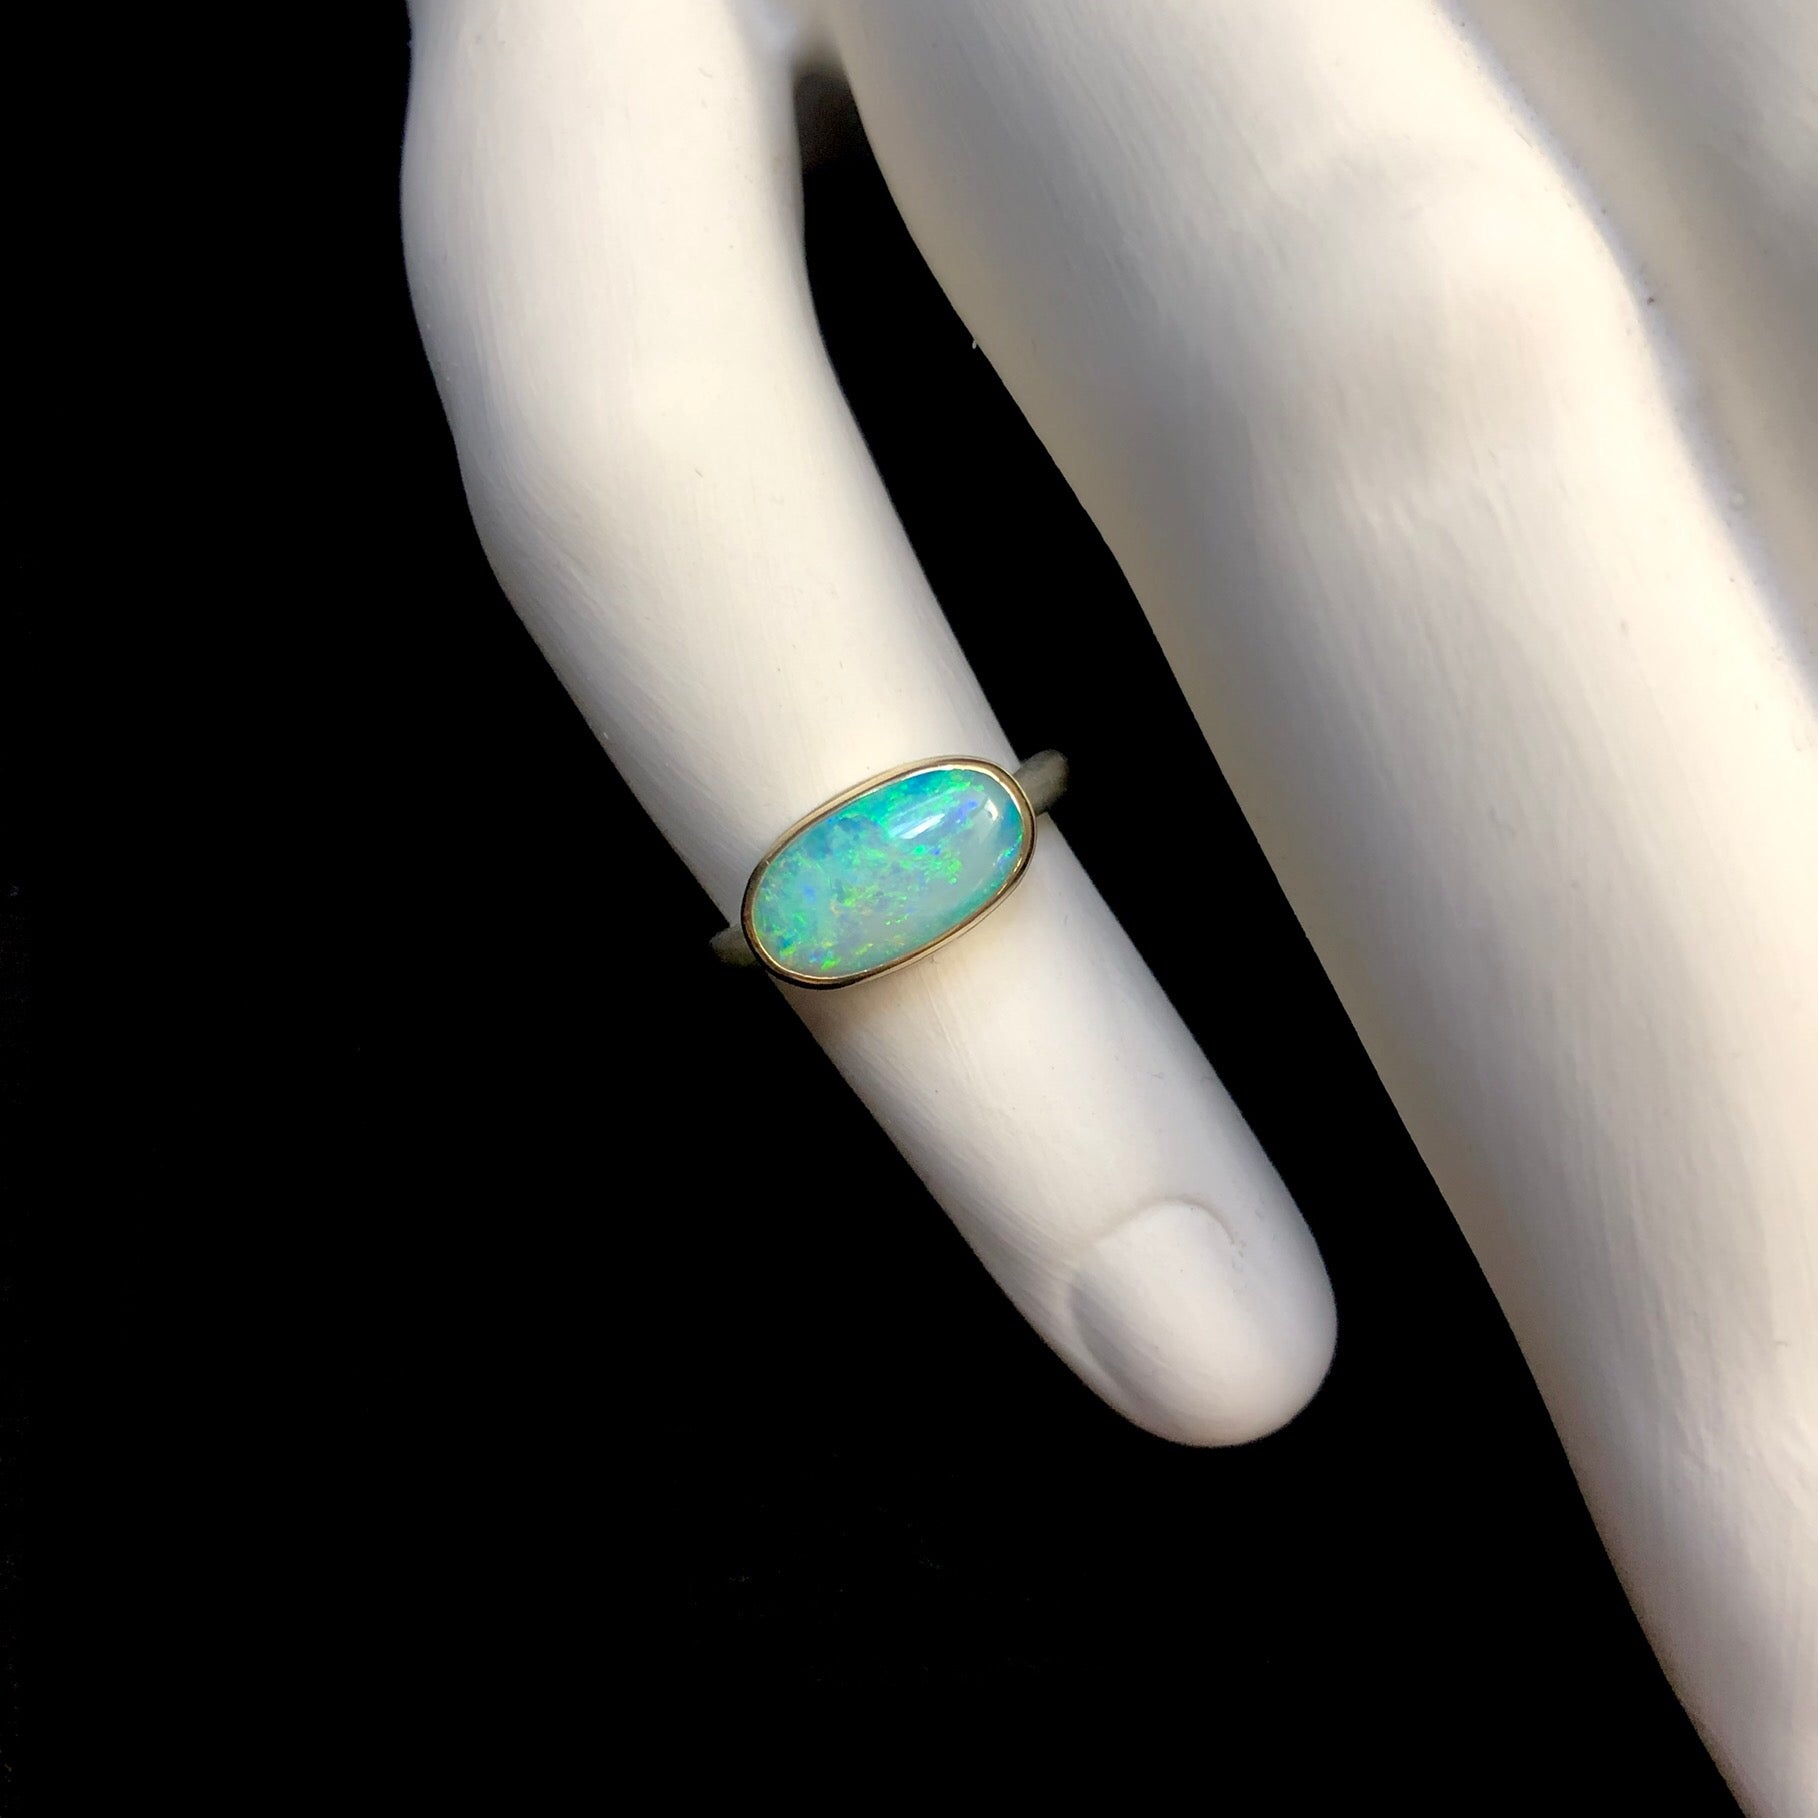 Oval shaped light green and blue opal stone ring shown on white ceramic finger